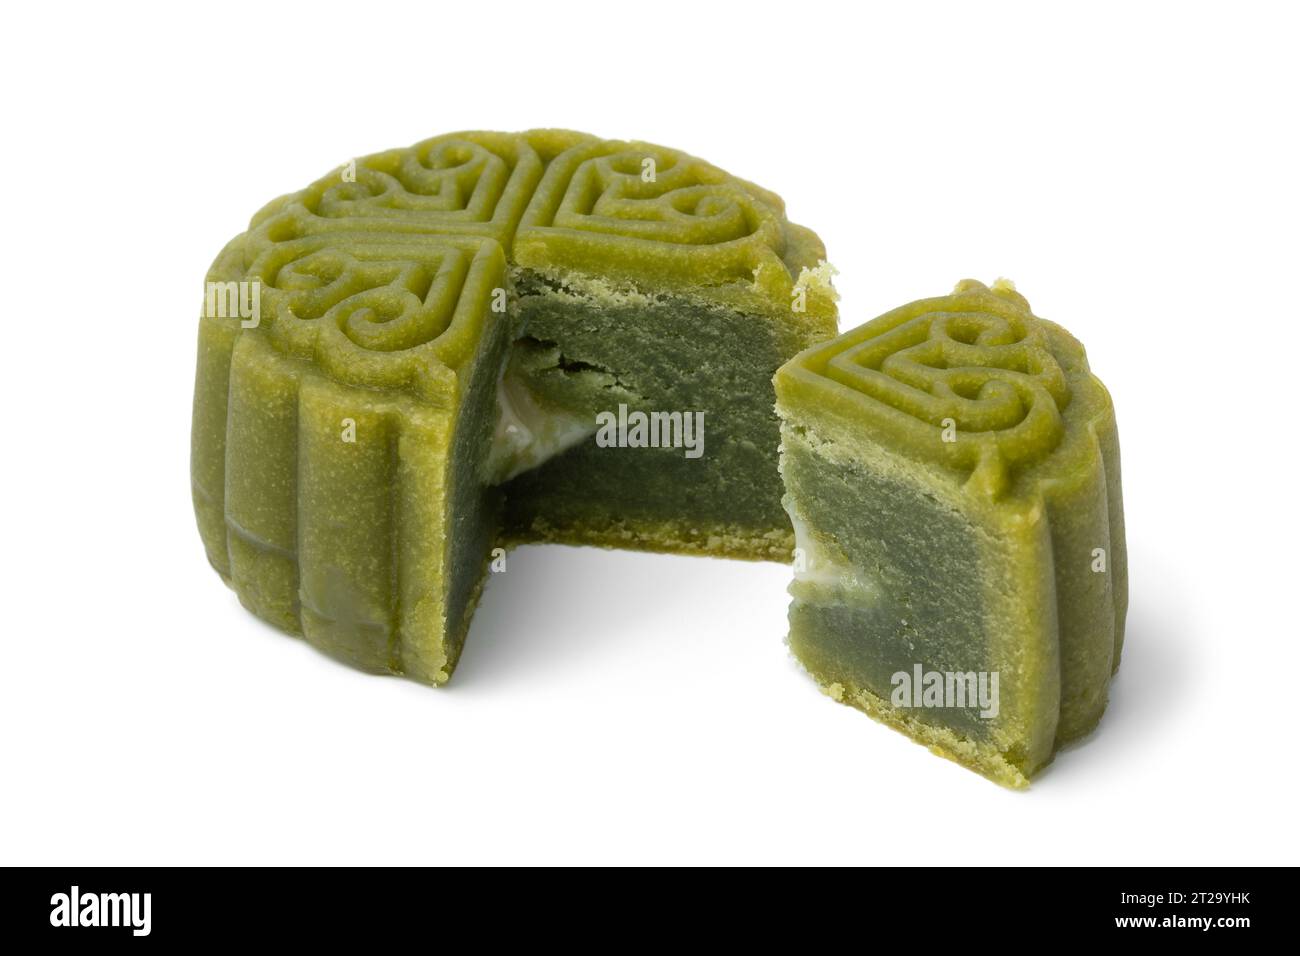 Green Snowskin or Crystal Skin Mooncake, a new variation of mooncake for Mid-Autumn Festival close up isolatede on white background Stock Photo